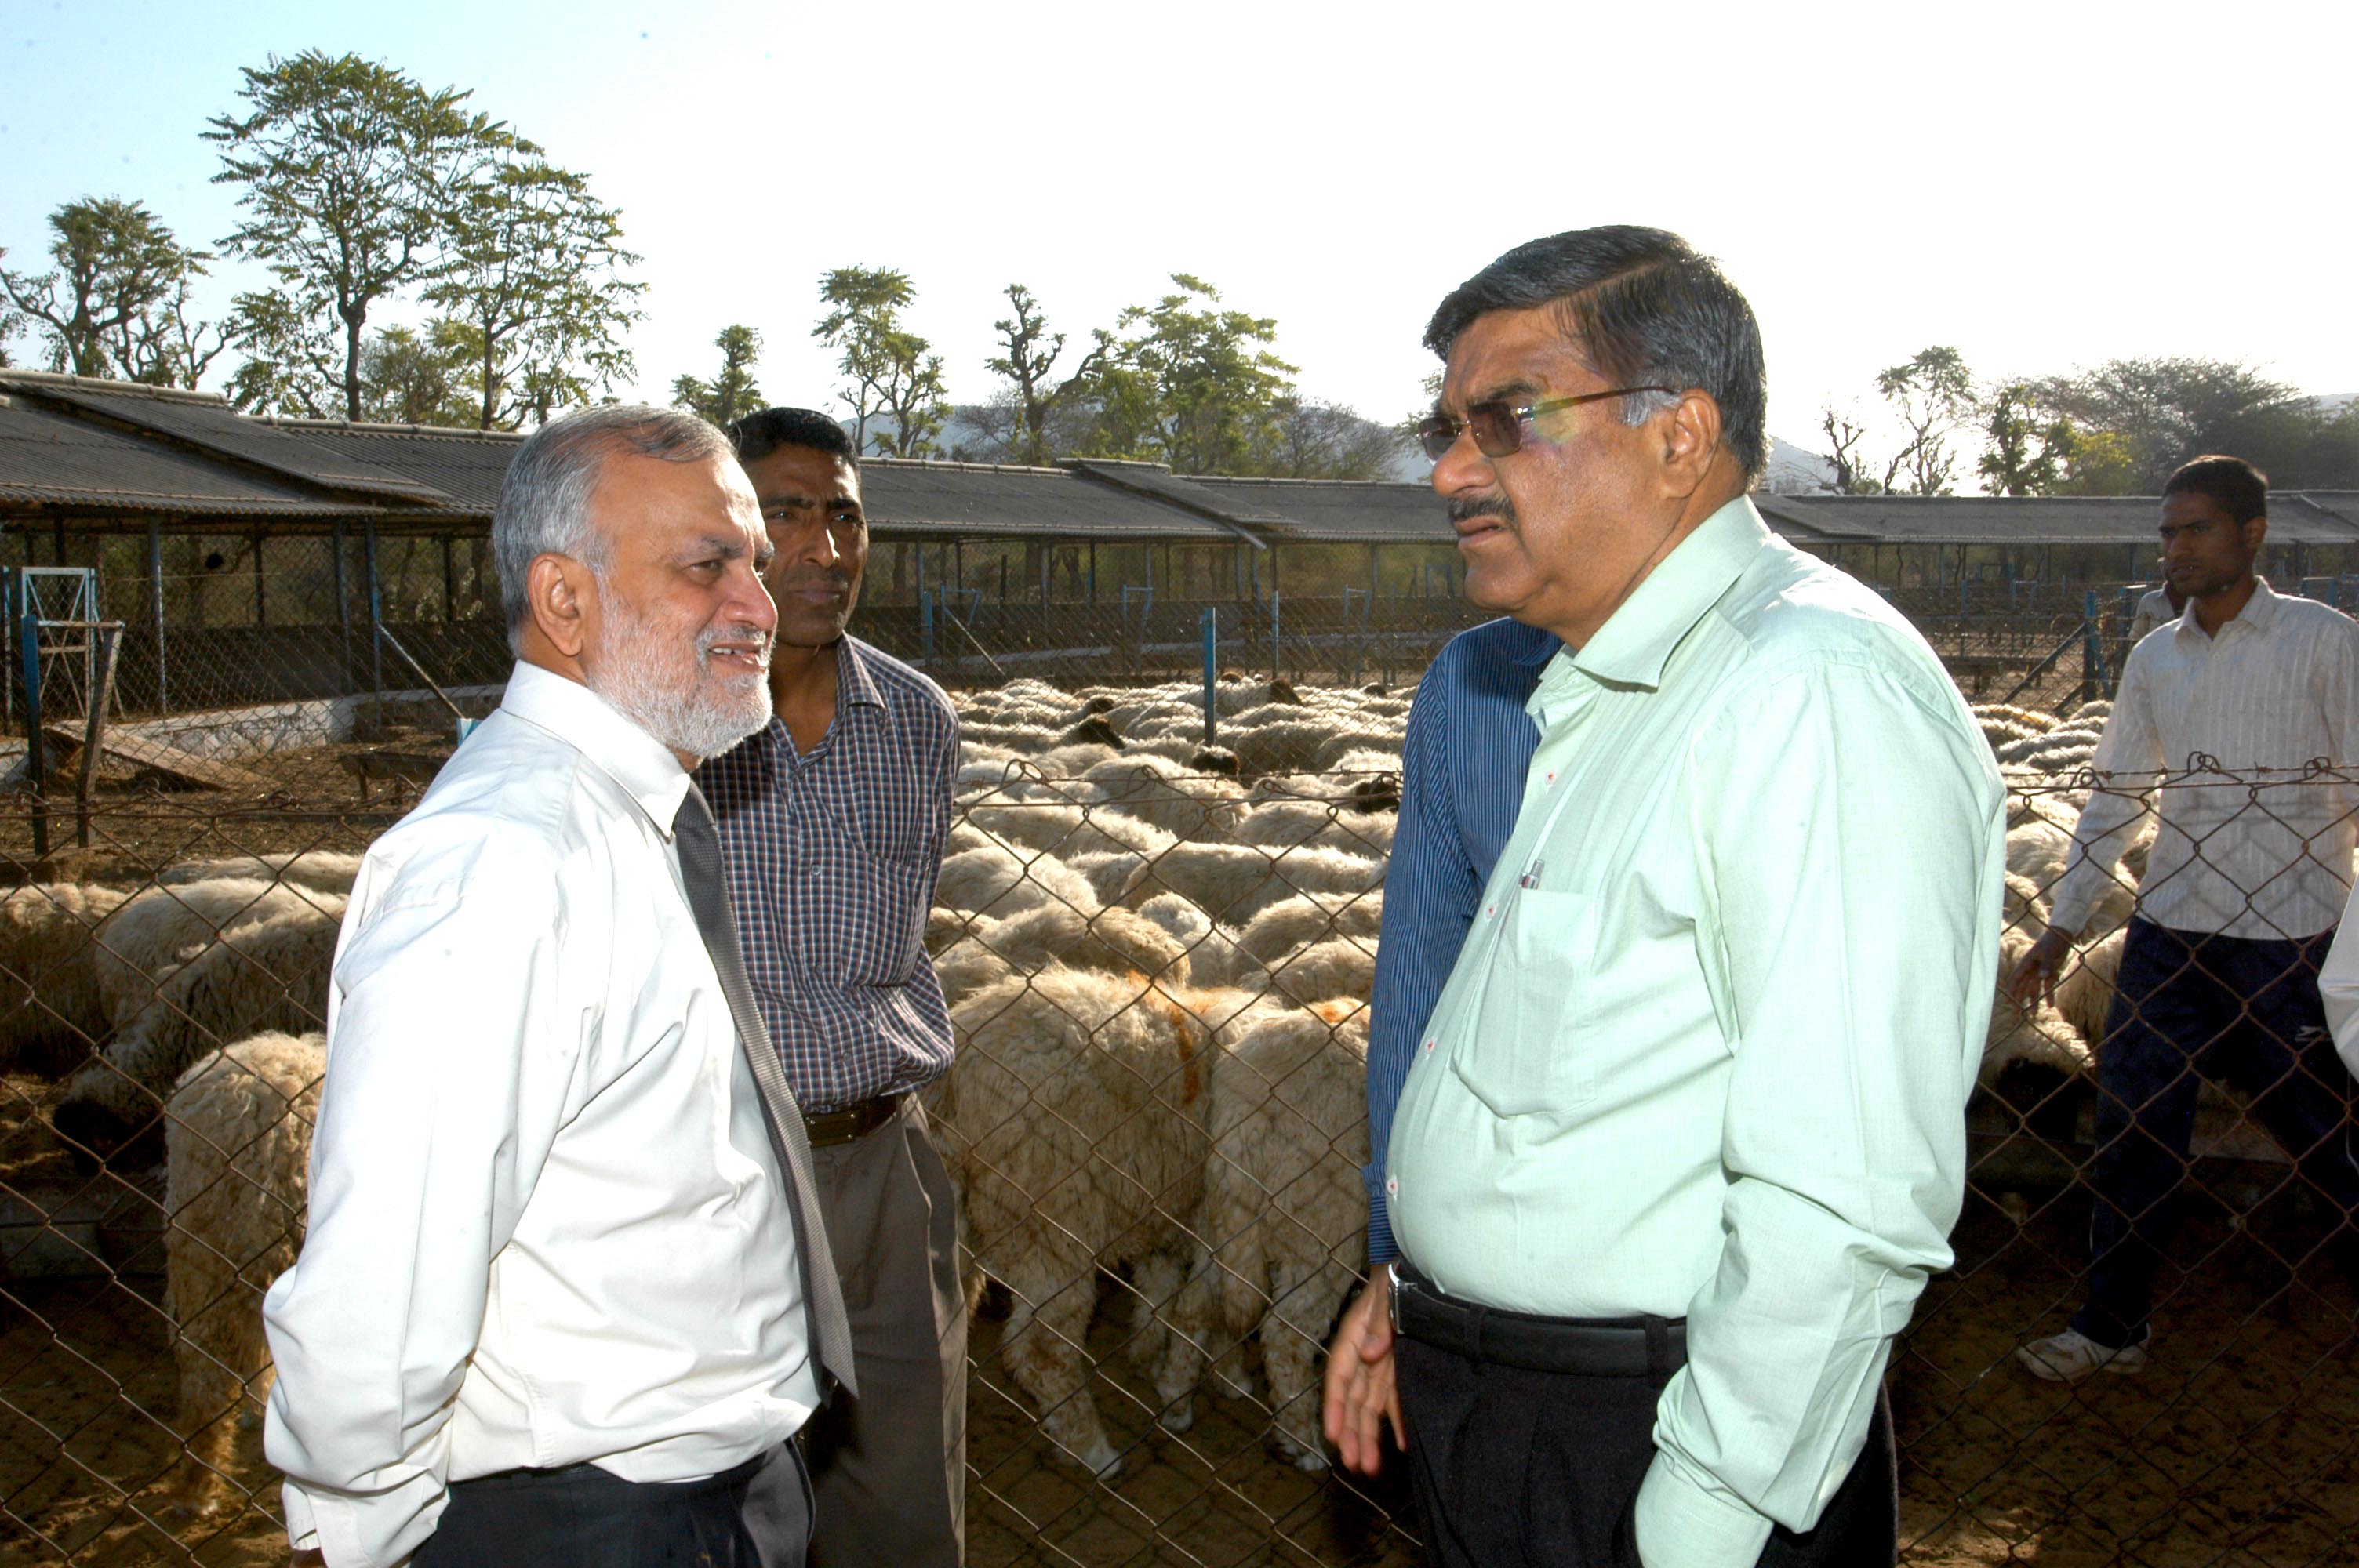 Discussion at Sheep Sector 18 